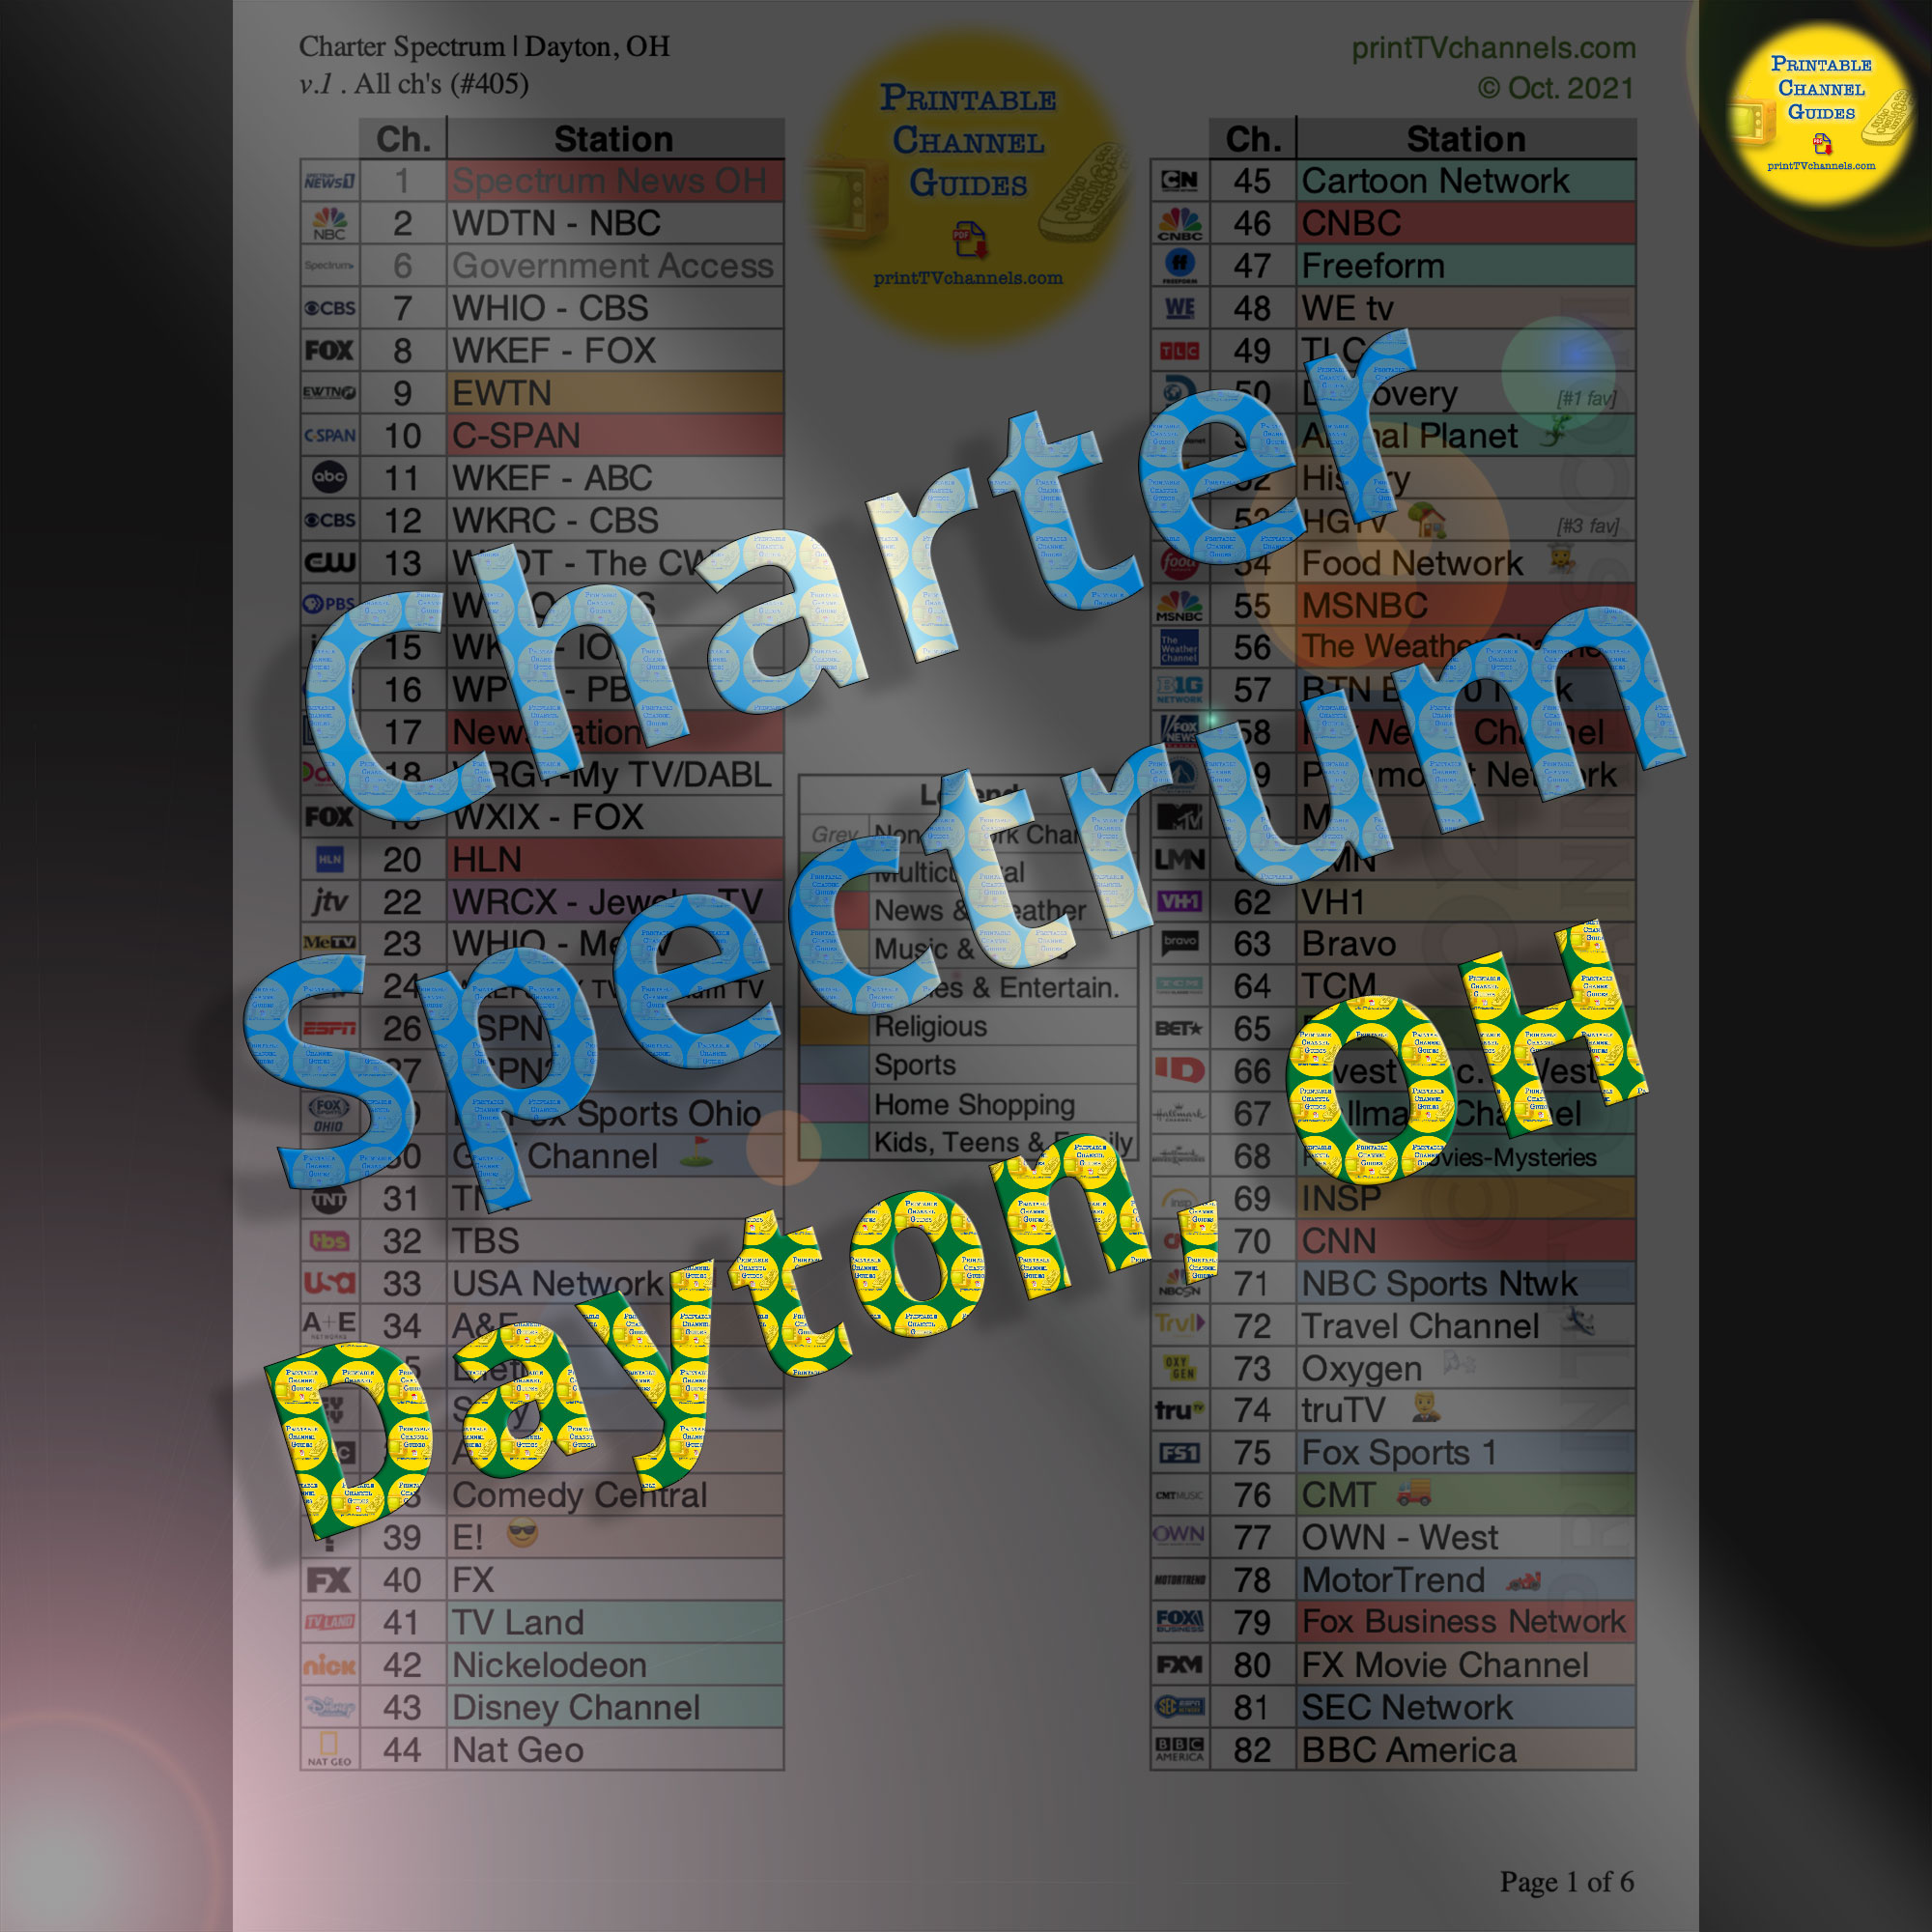 Printable Charter Spectrum Channel Lineup Guide — Dayton, OH